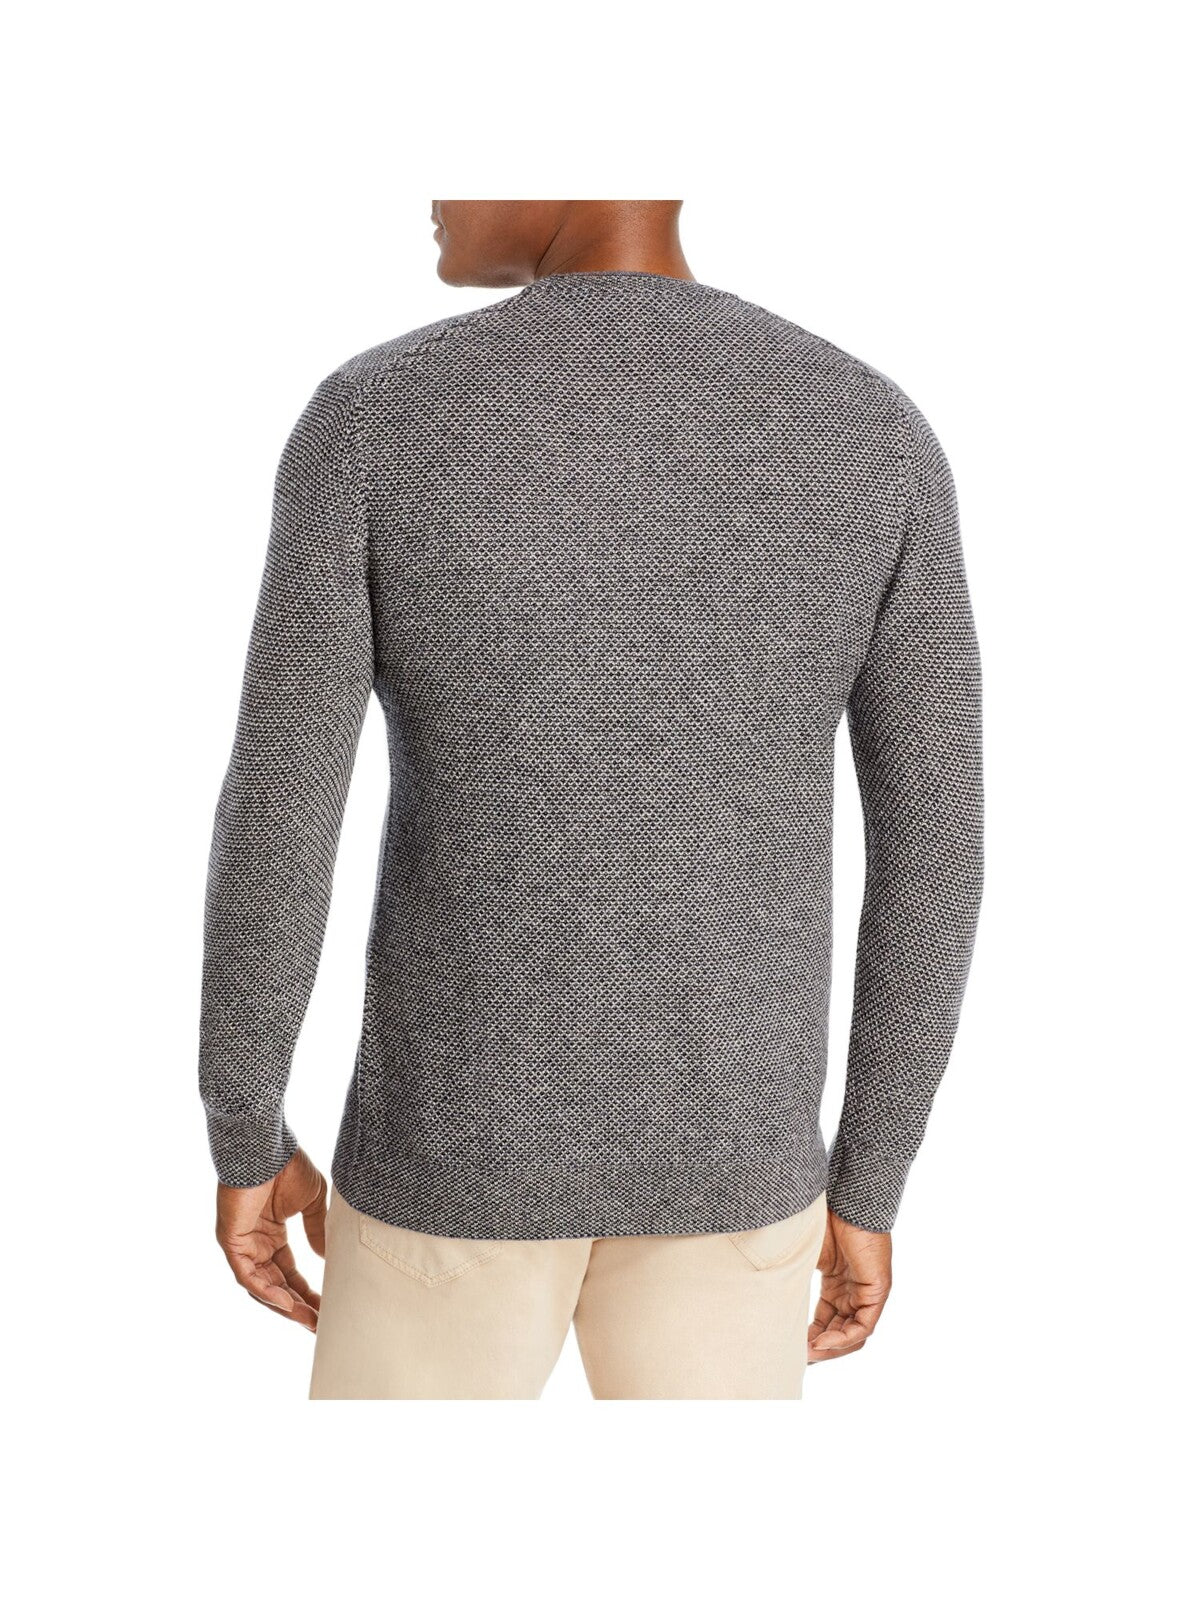 THE MENS STORE Mens Gray Patterned Crew Neck Knit Pullover Sweater XL